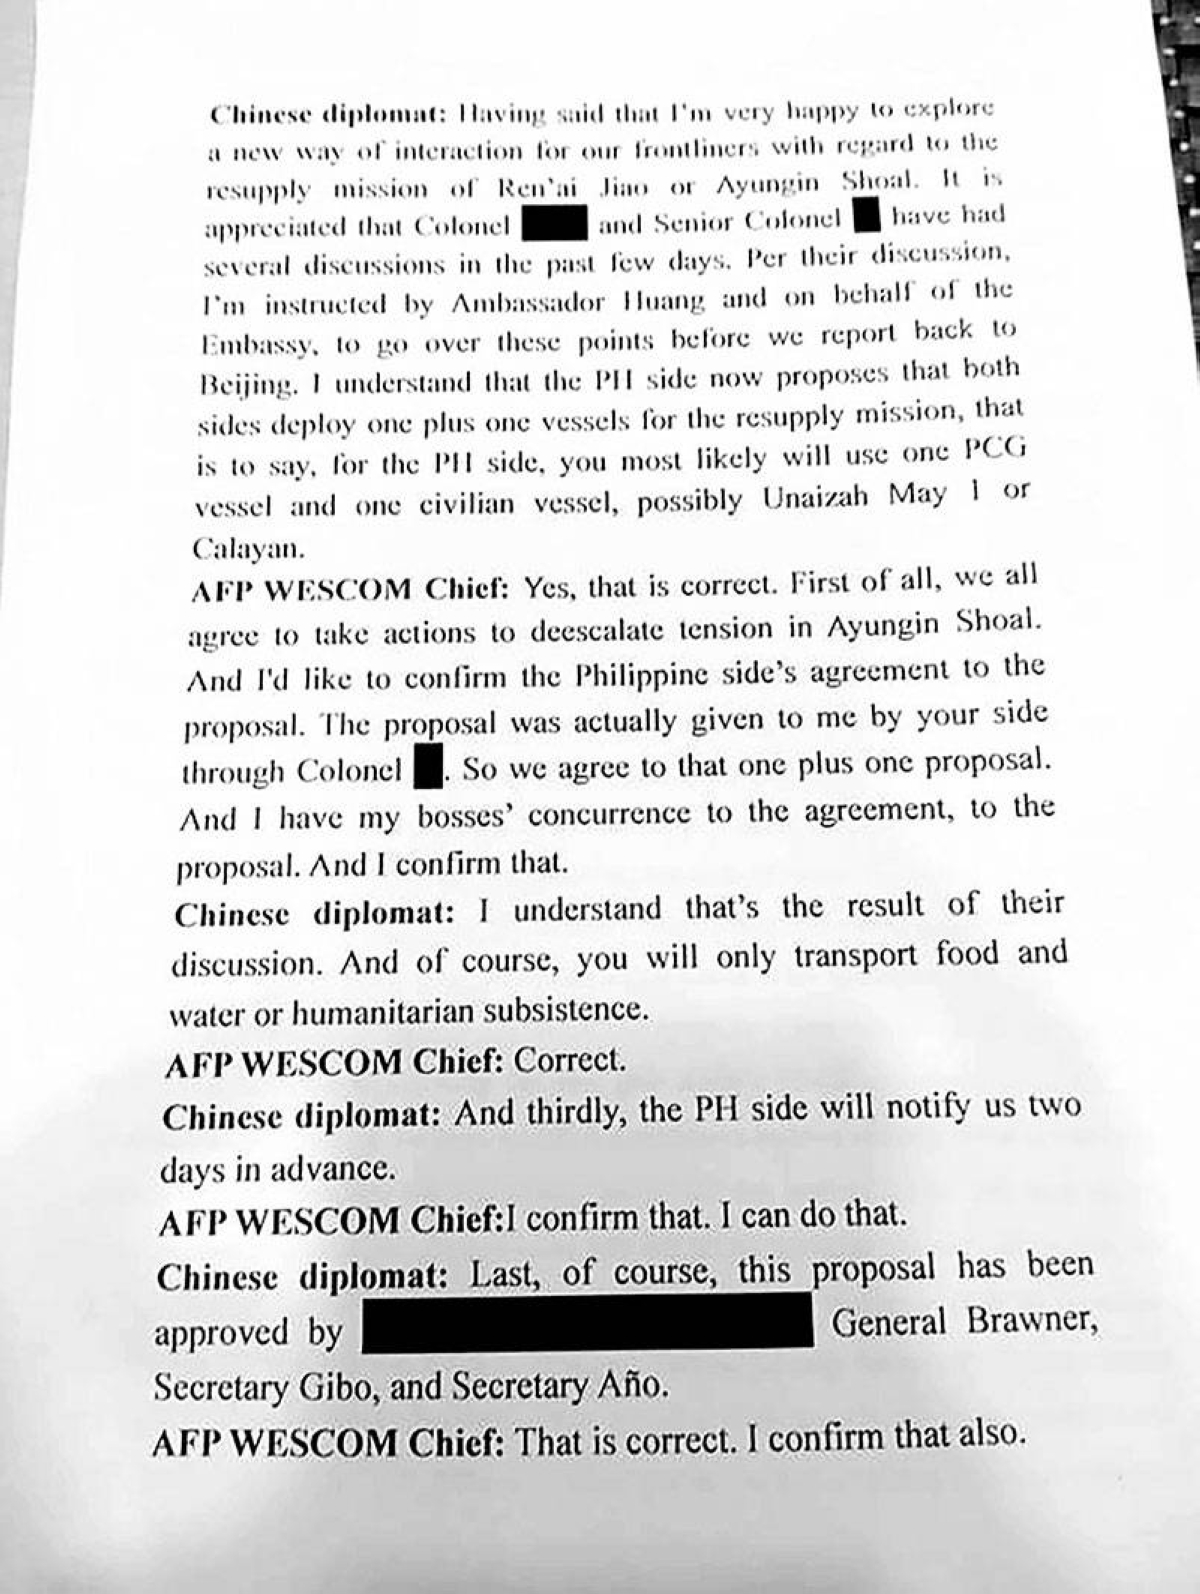 Transcript of the alleged recorded conversation made available for The Manila Times.